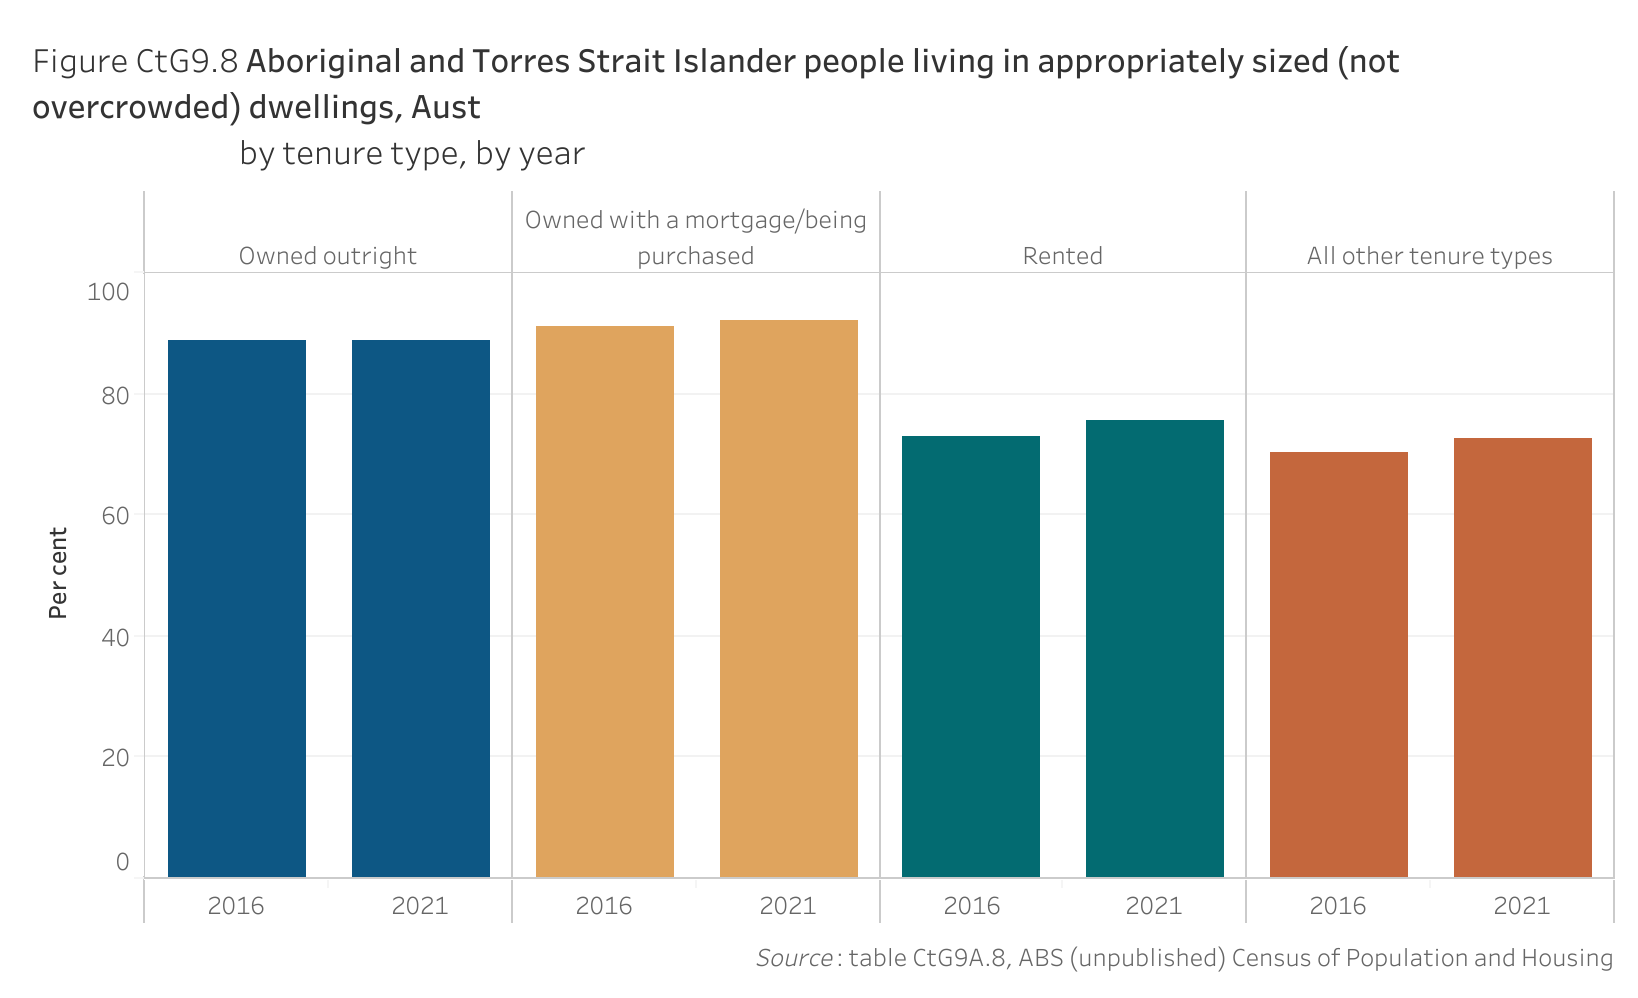 Figure CtG9.8 shows Aboriginal and Torres Strait Islander people living in appropriately sized (not overcrowded) dwellings, Australia, by tenure type, by year. More details can be found within the text near this image.